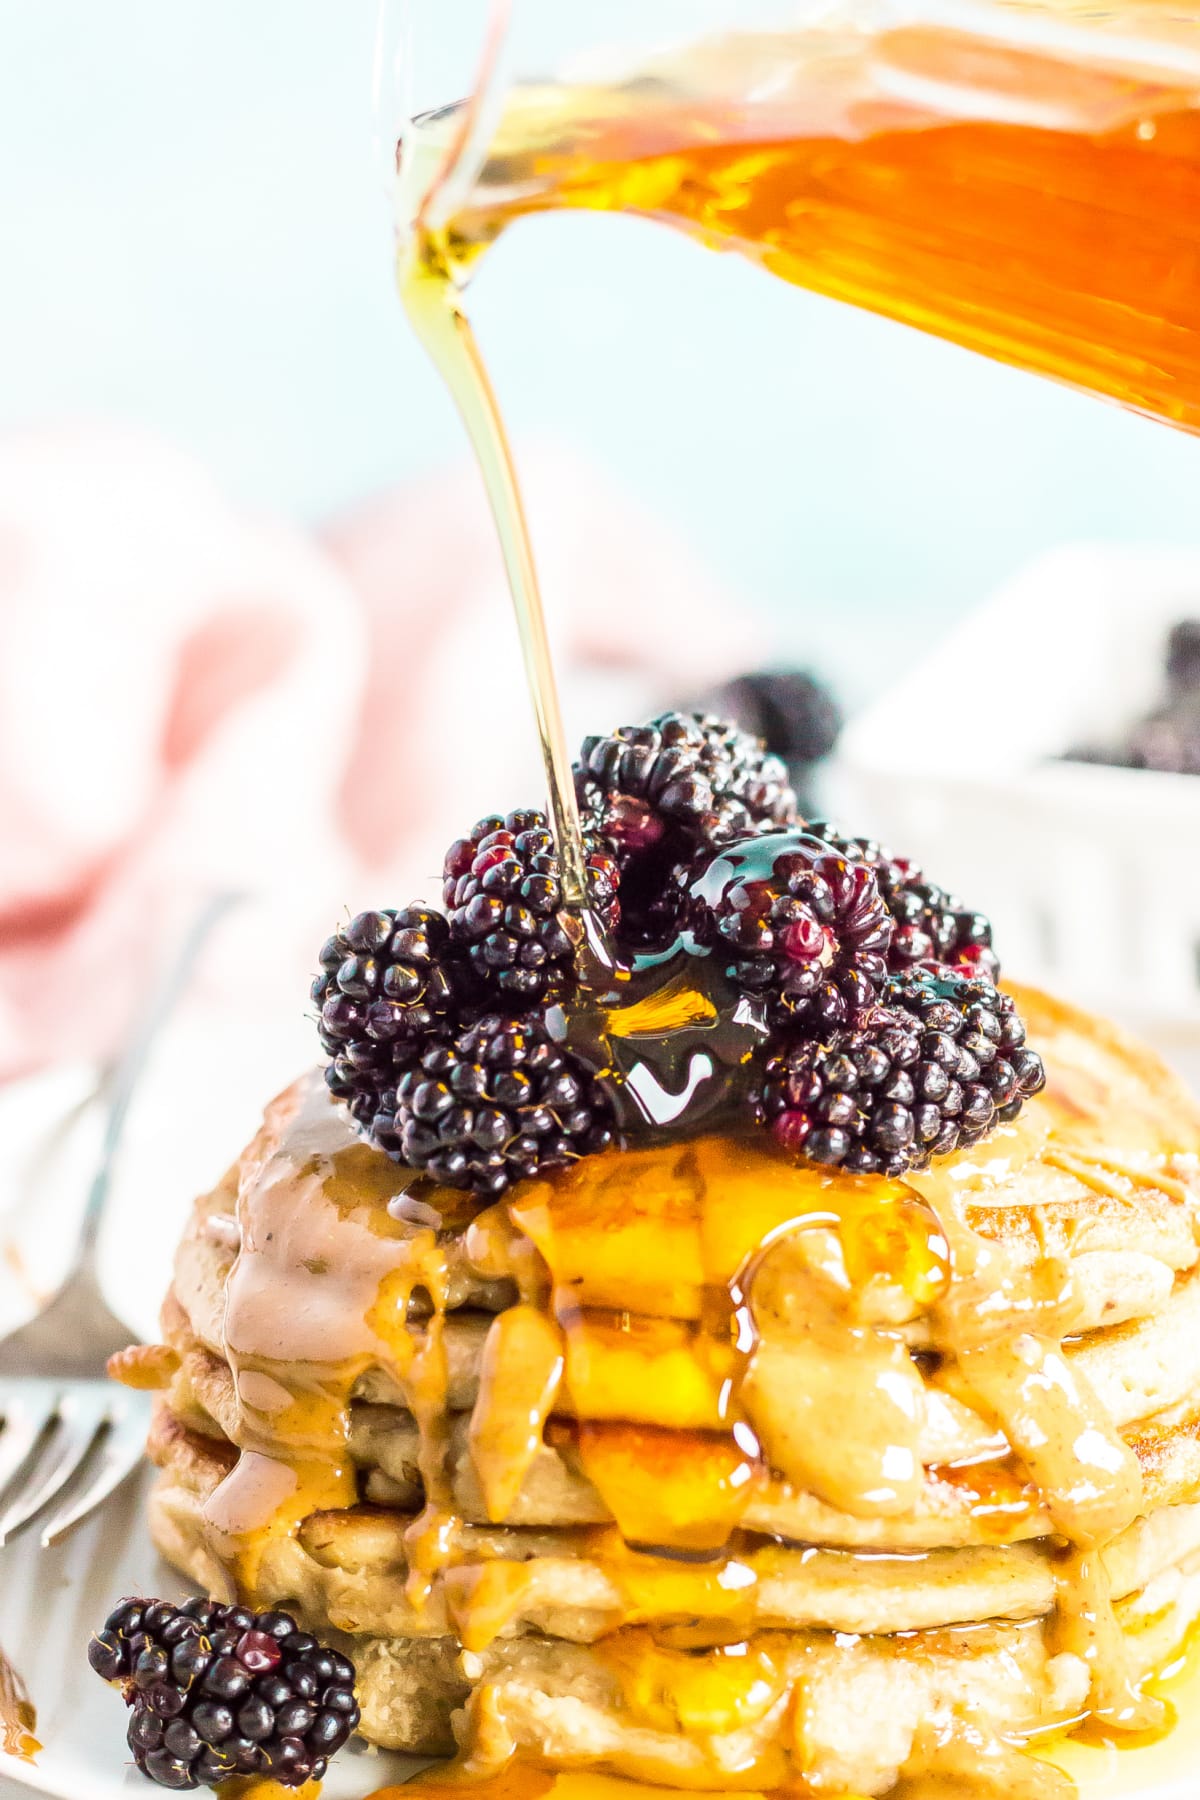 A small glass pitcher is pouring syrup over a stack of pancakes topped with peanut butter and blackberries.